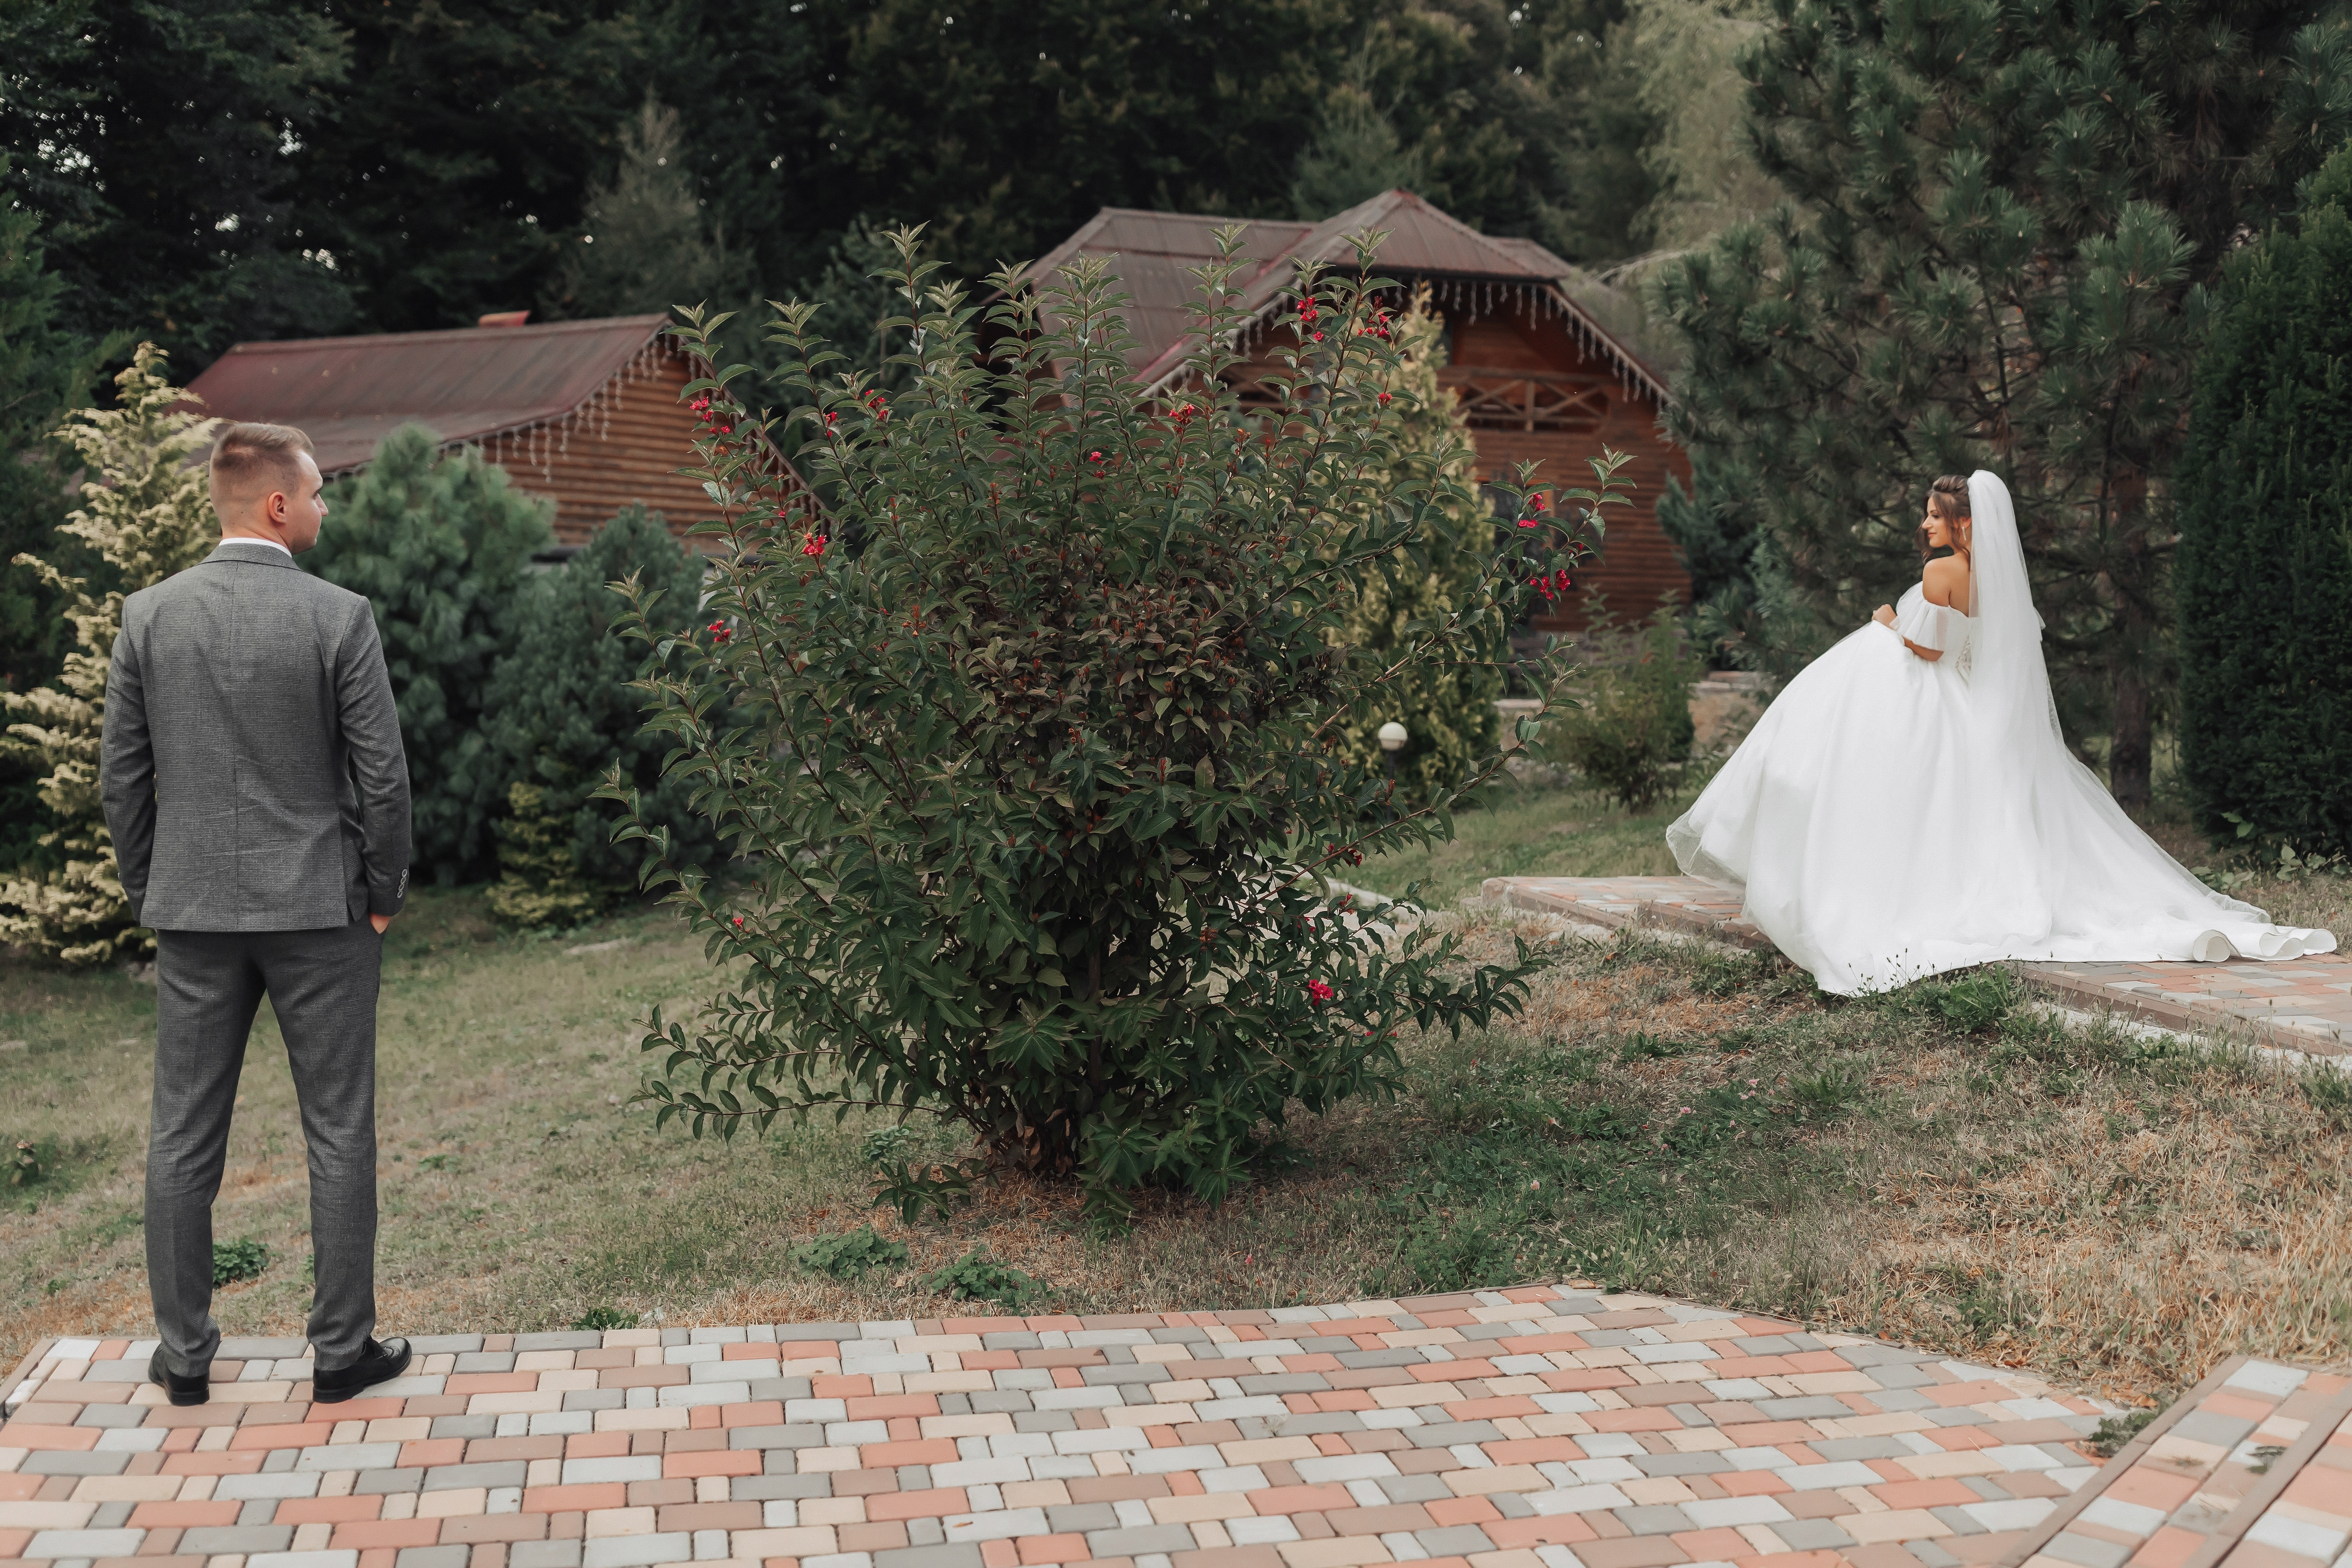 A bride and groom standing apart in a garden | Source: Shutterstock